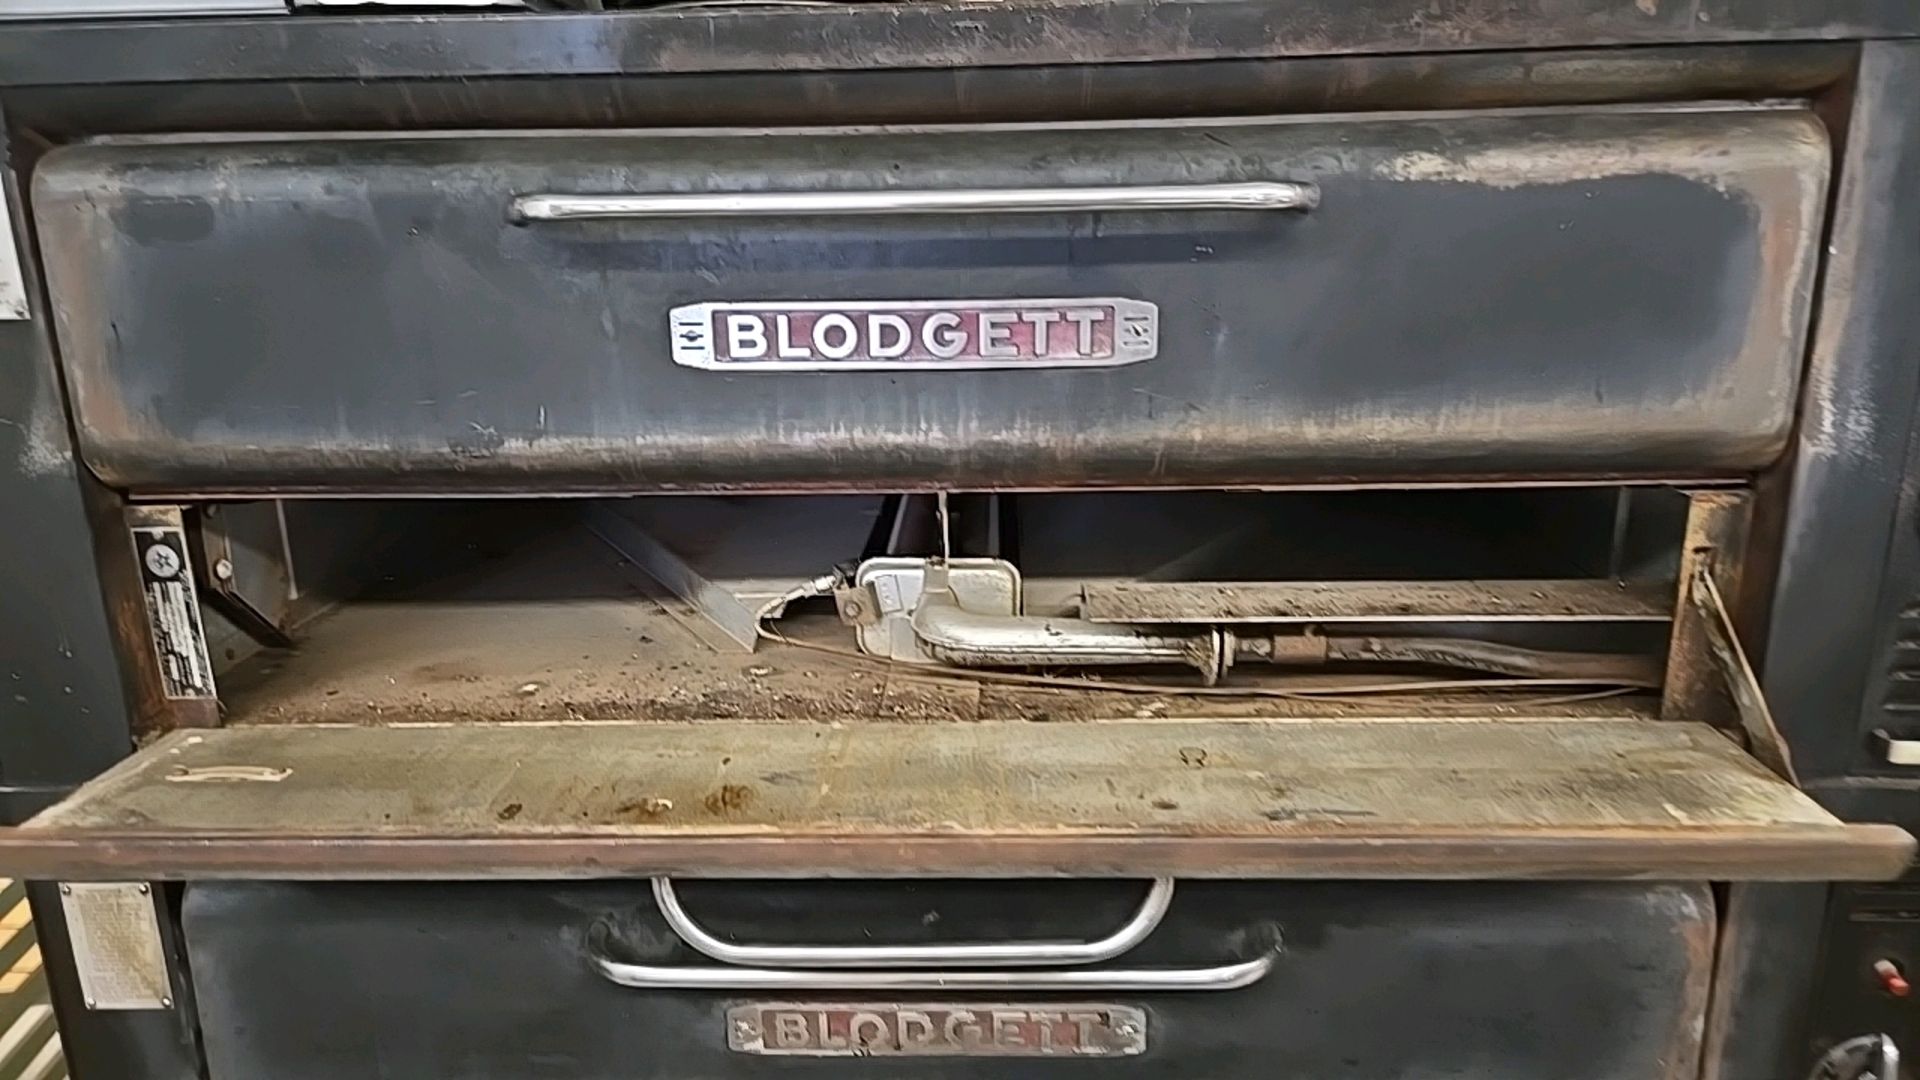 BLODGETT TRIPLE STACK DECK OVEN - Image 3 of 6